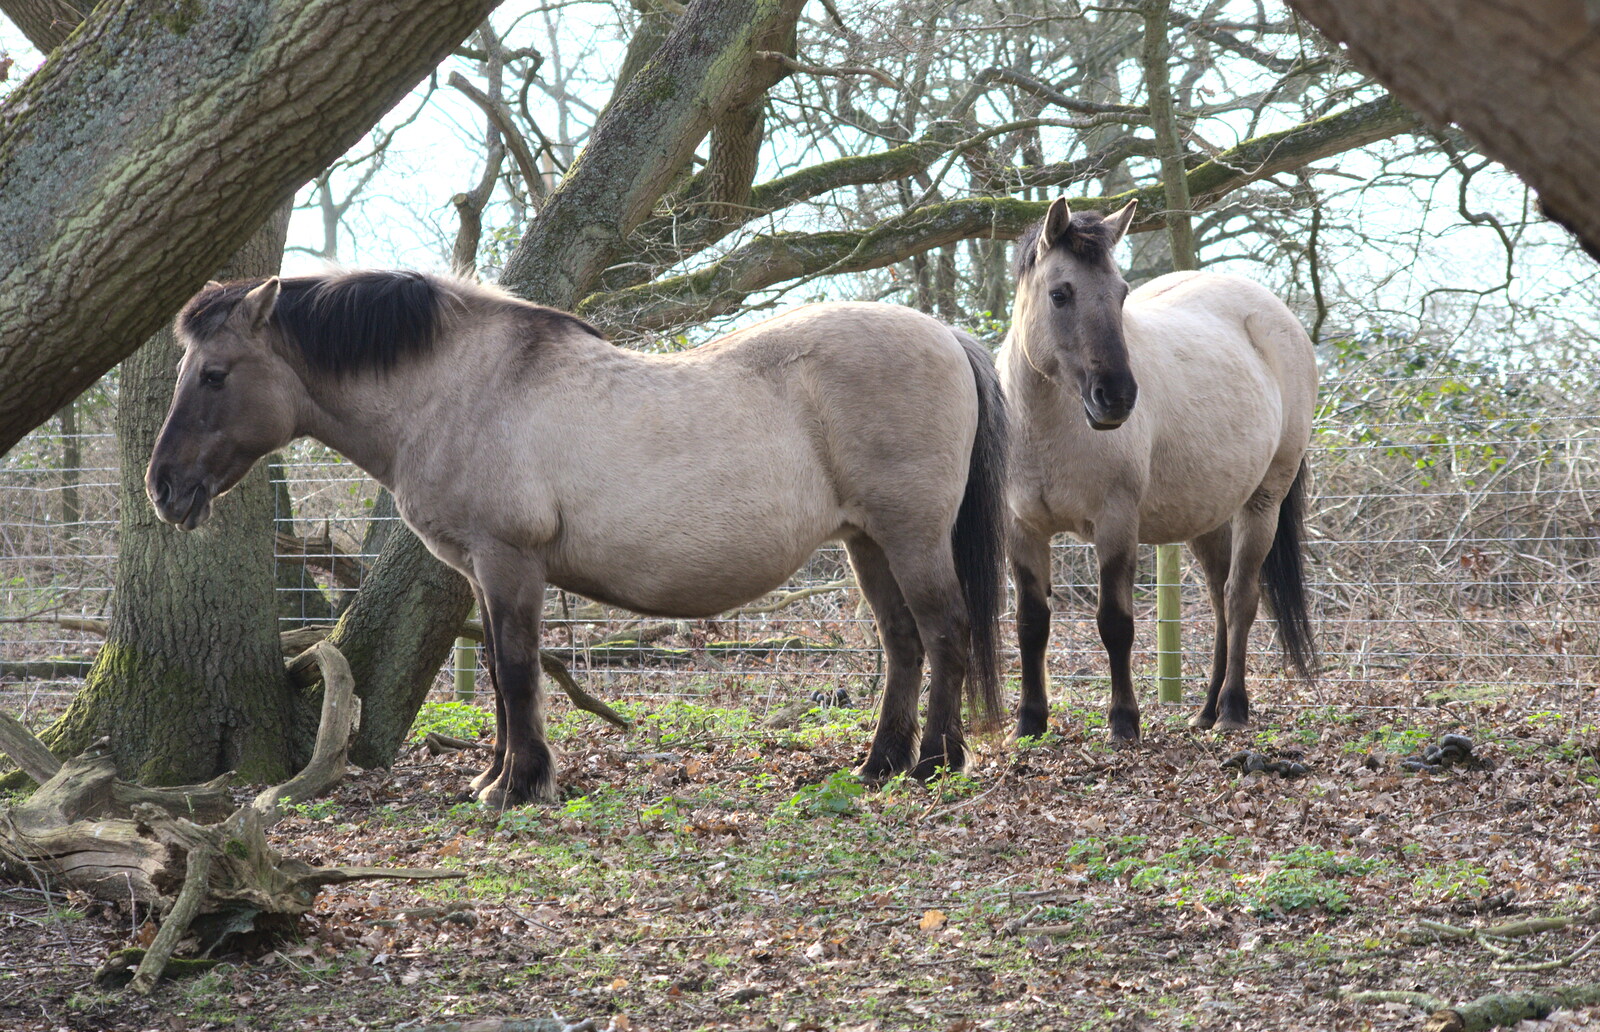 More ponies in the trees from Redgrave and Lopham Fen, Suffolk Border - 11th March 2017